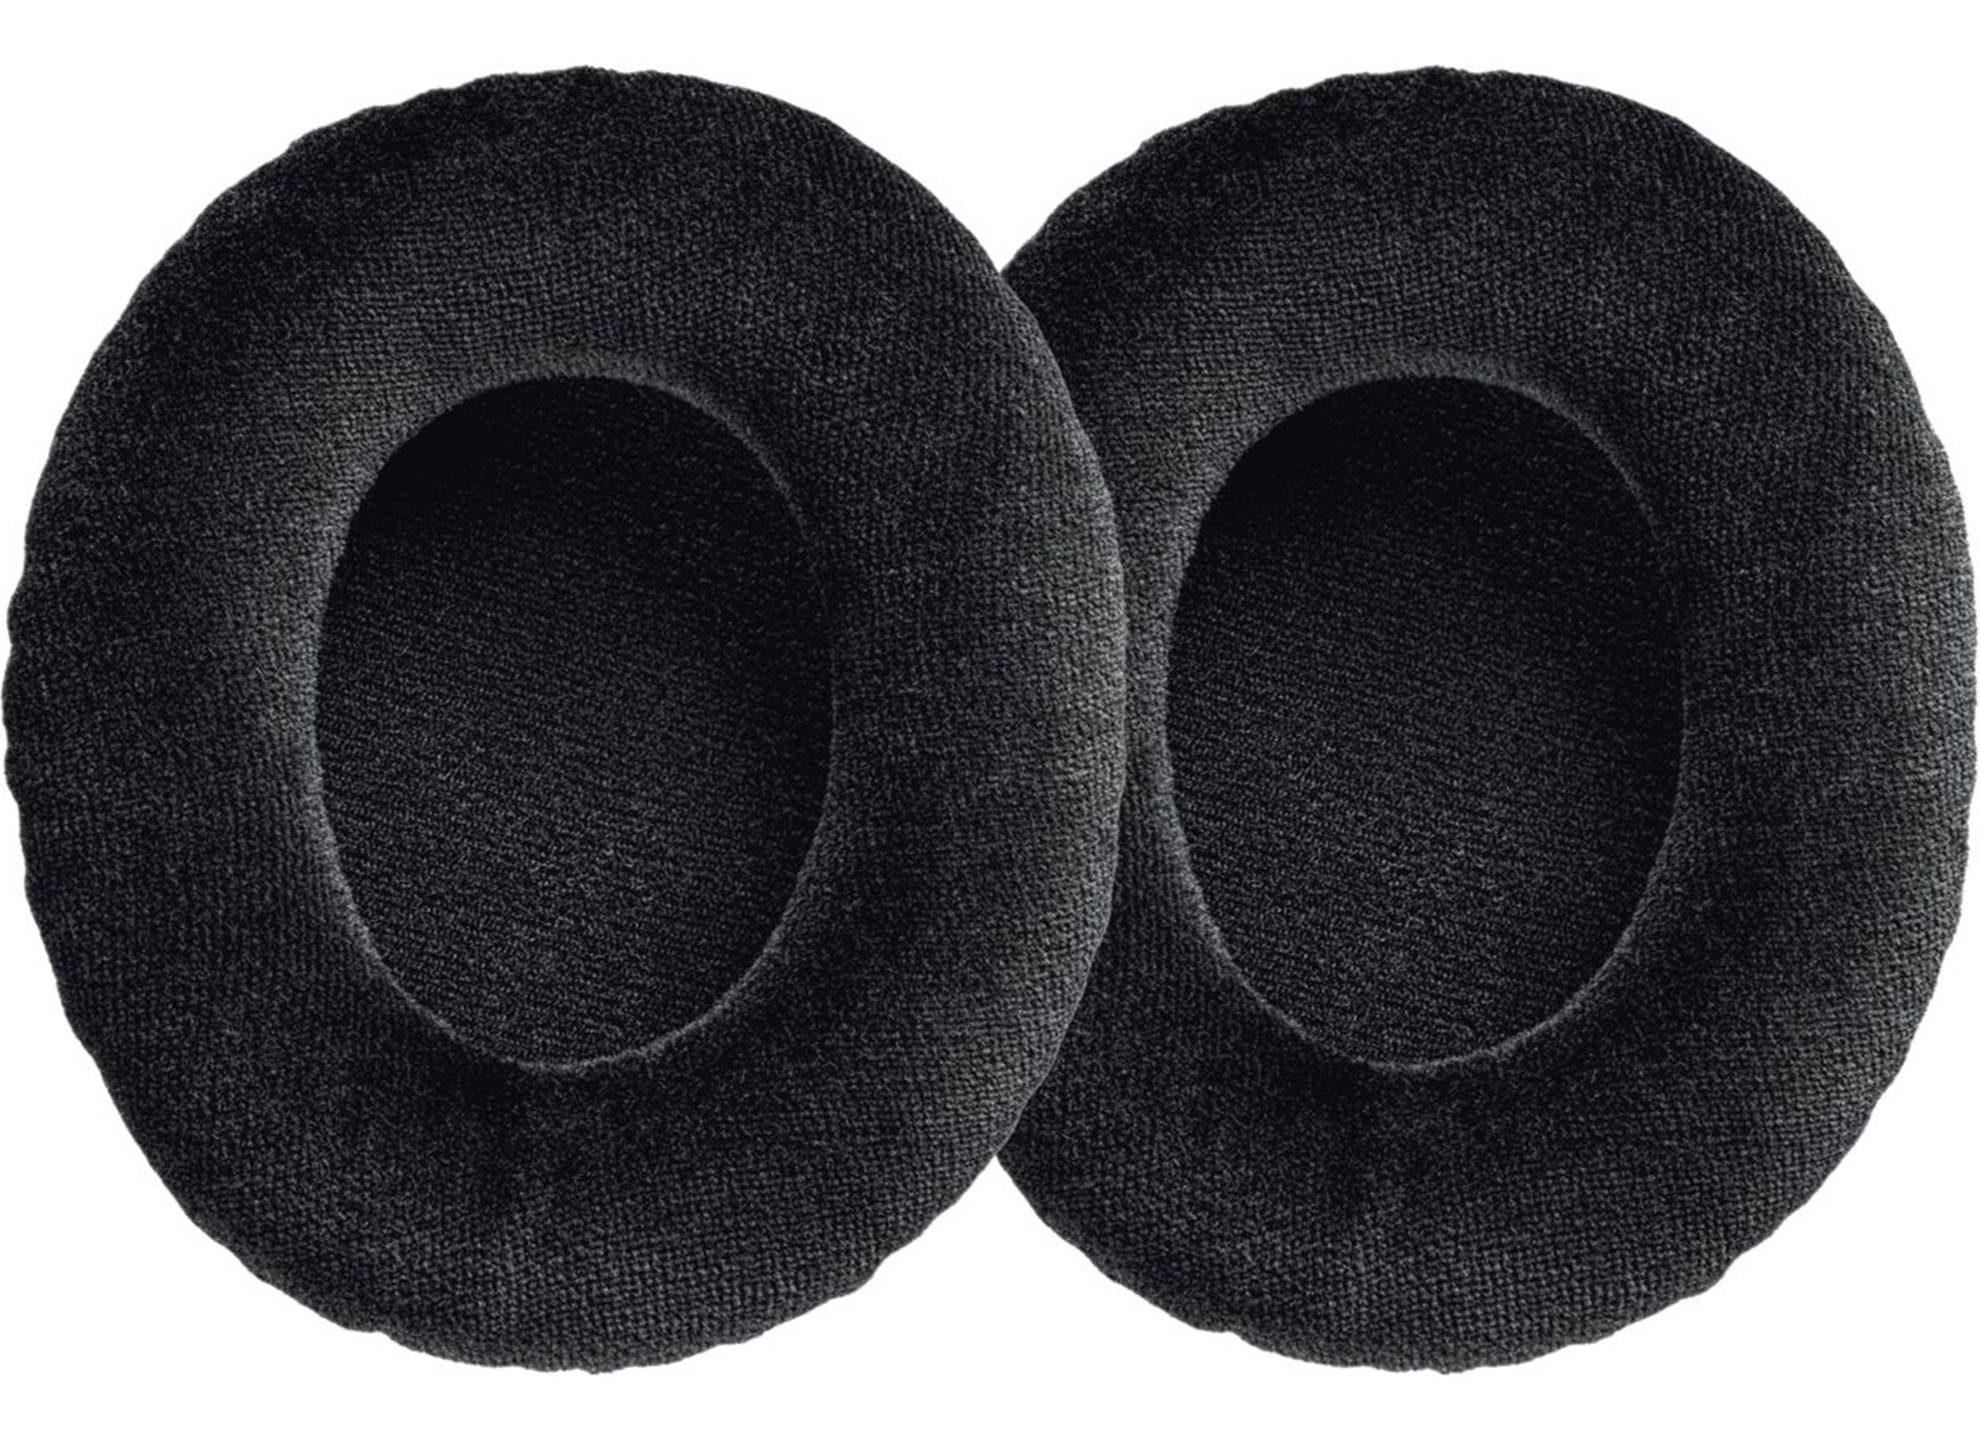 HPAEC940 Replacement Ear Cushions SRH940